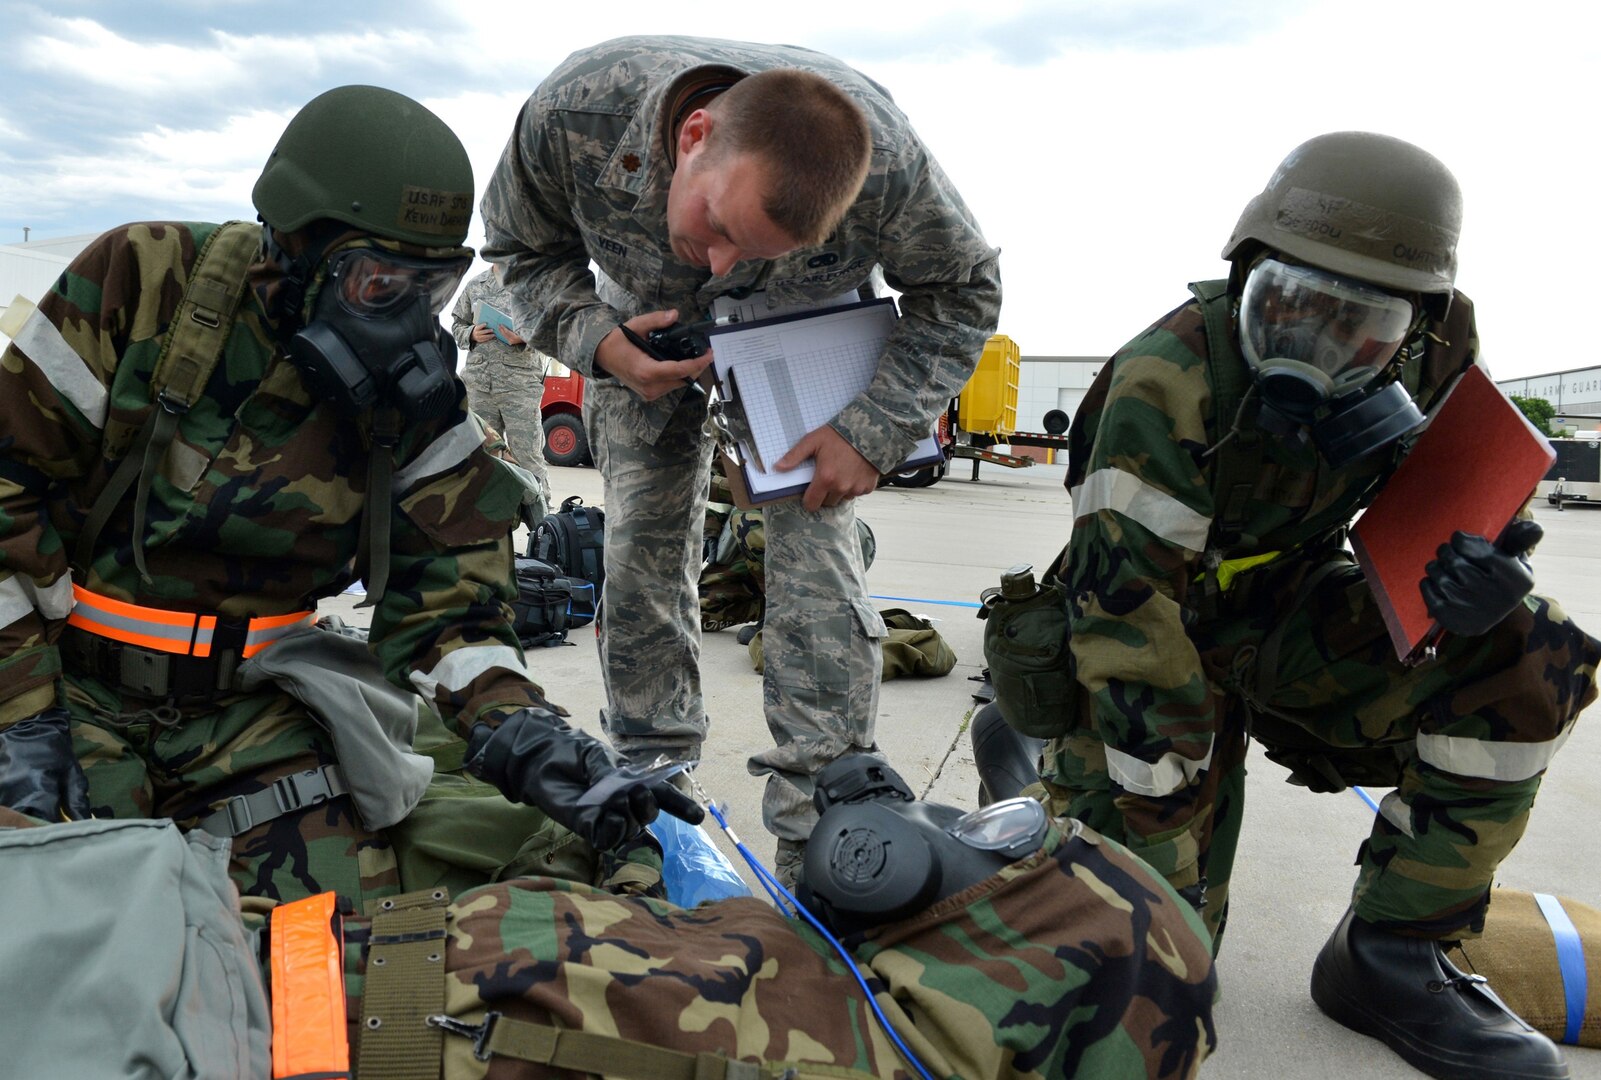 Members of the Nebraska Air National Guard's 155th Air Refueling Wing participate in an Ability to Survive and Operate exercise at the Nebraska National Guard air base in Lincoln, Neb., June 11, 2013.